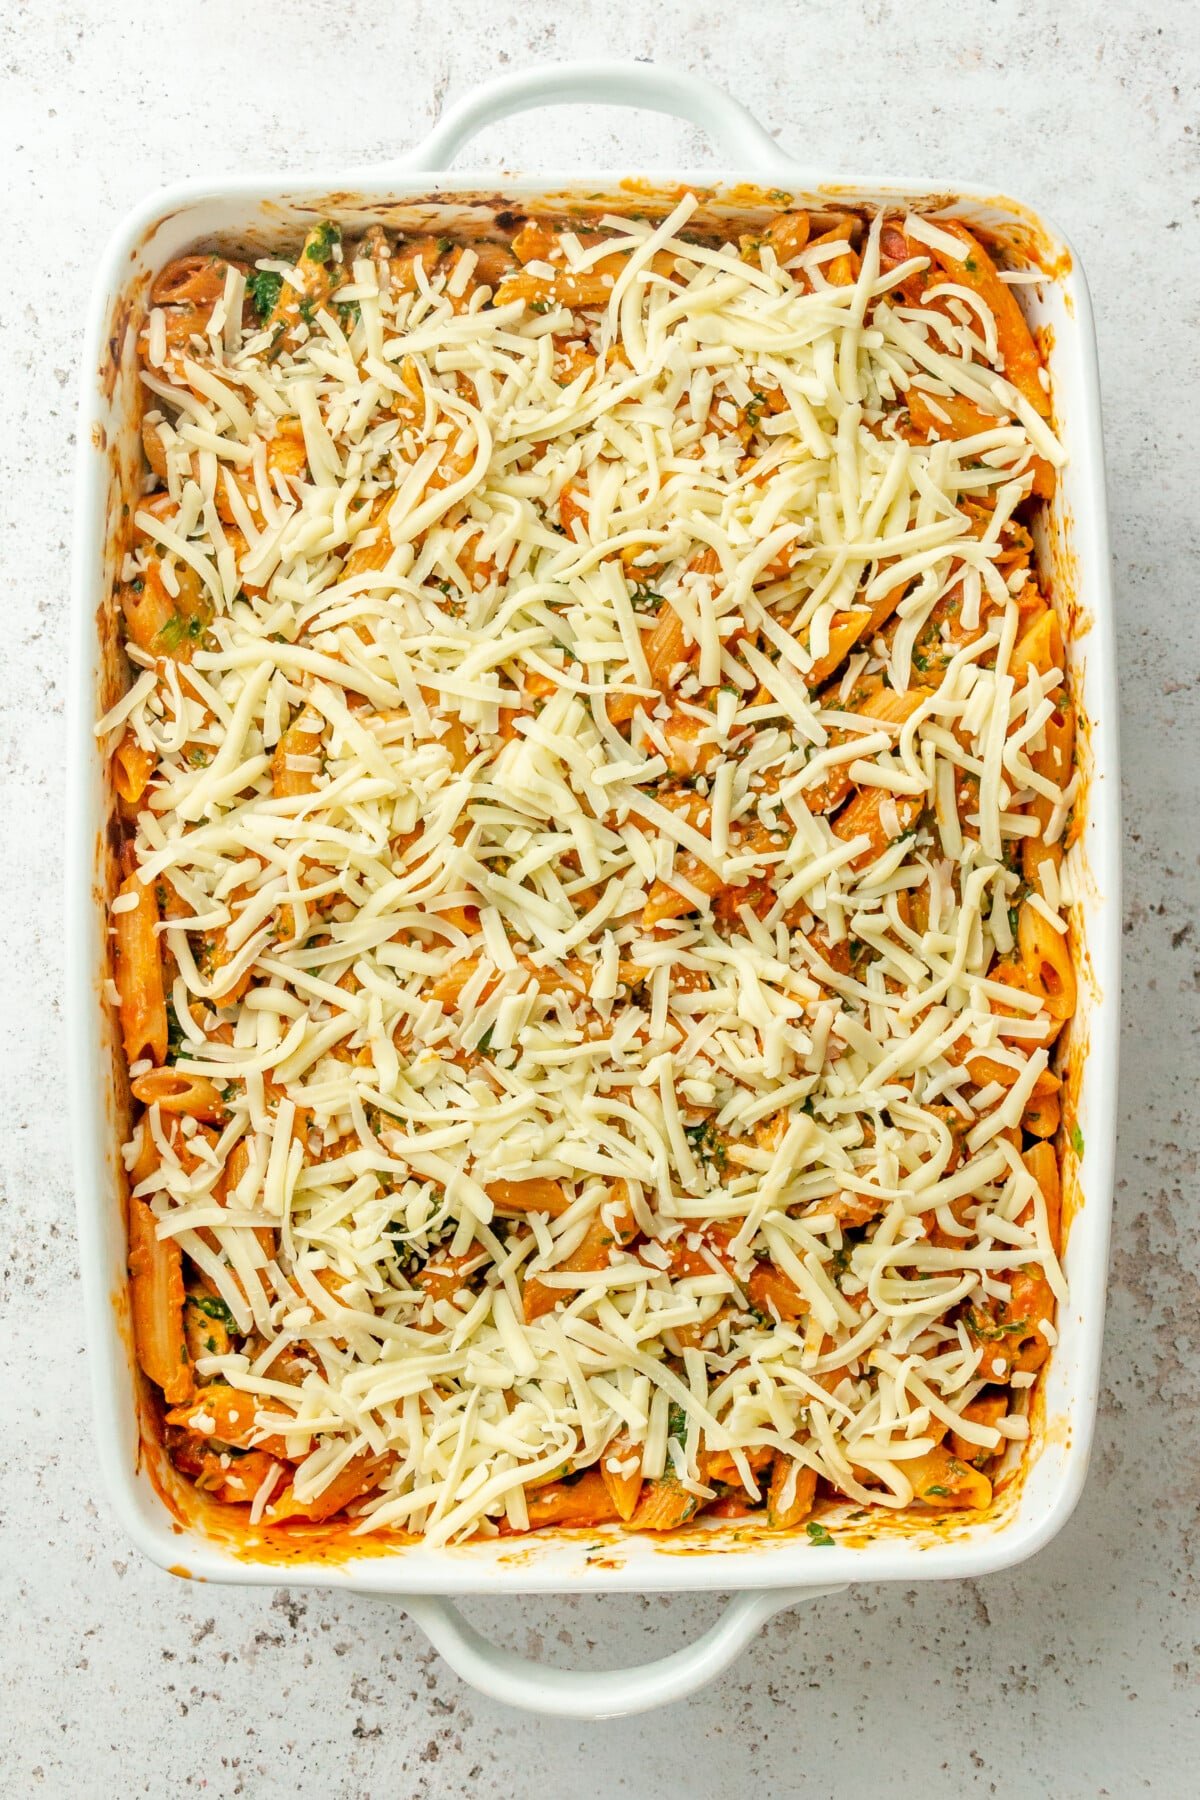 Grated cheese sits on top of a no boil pasta bake on a light grey colored surface.